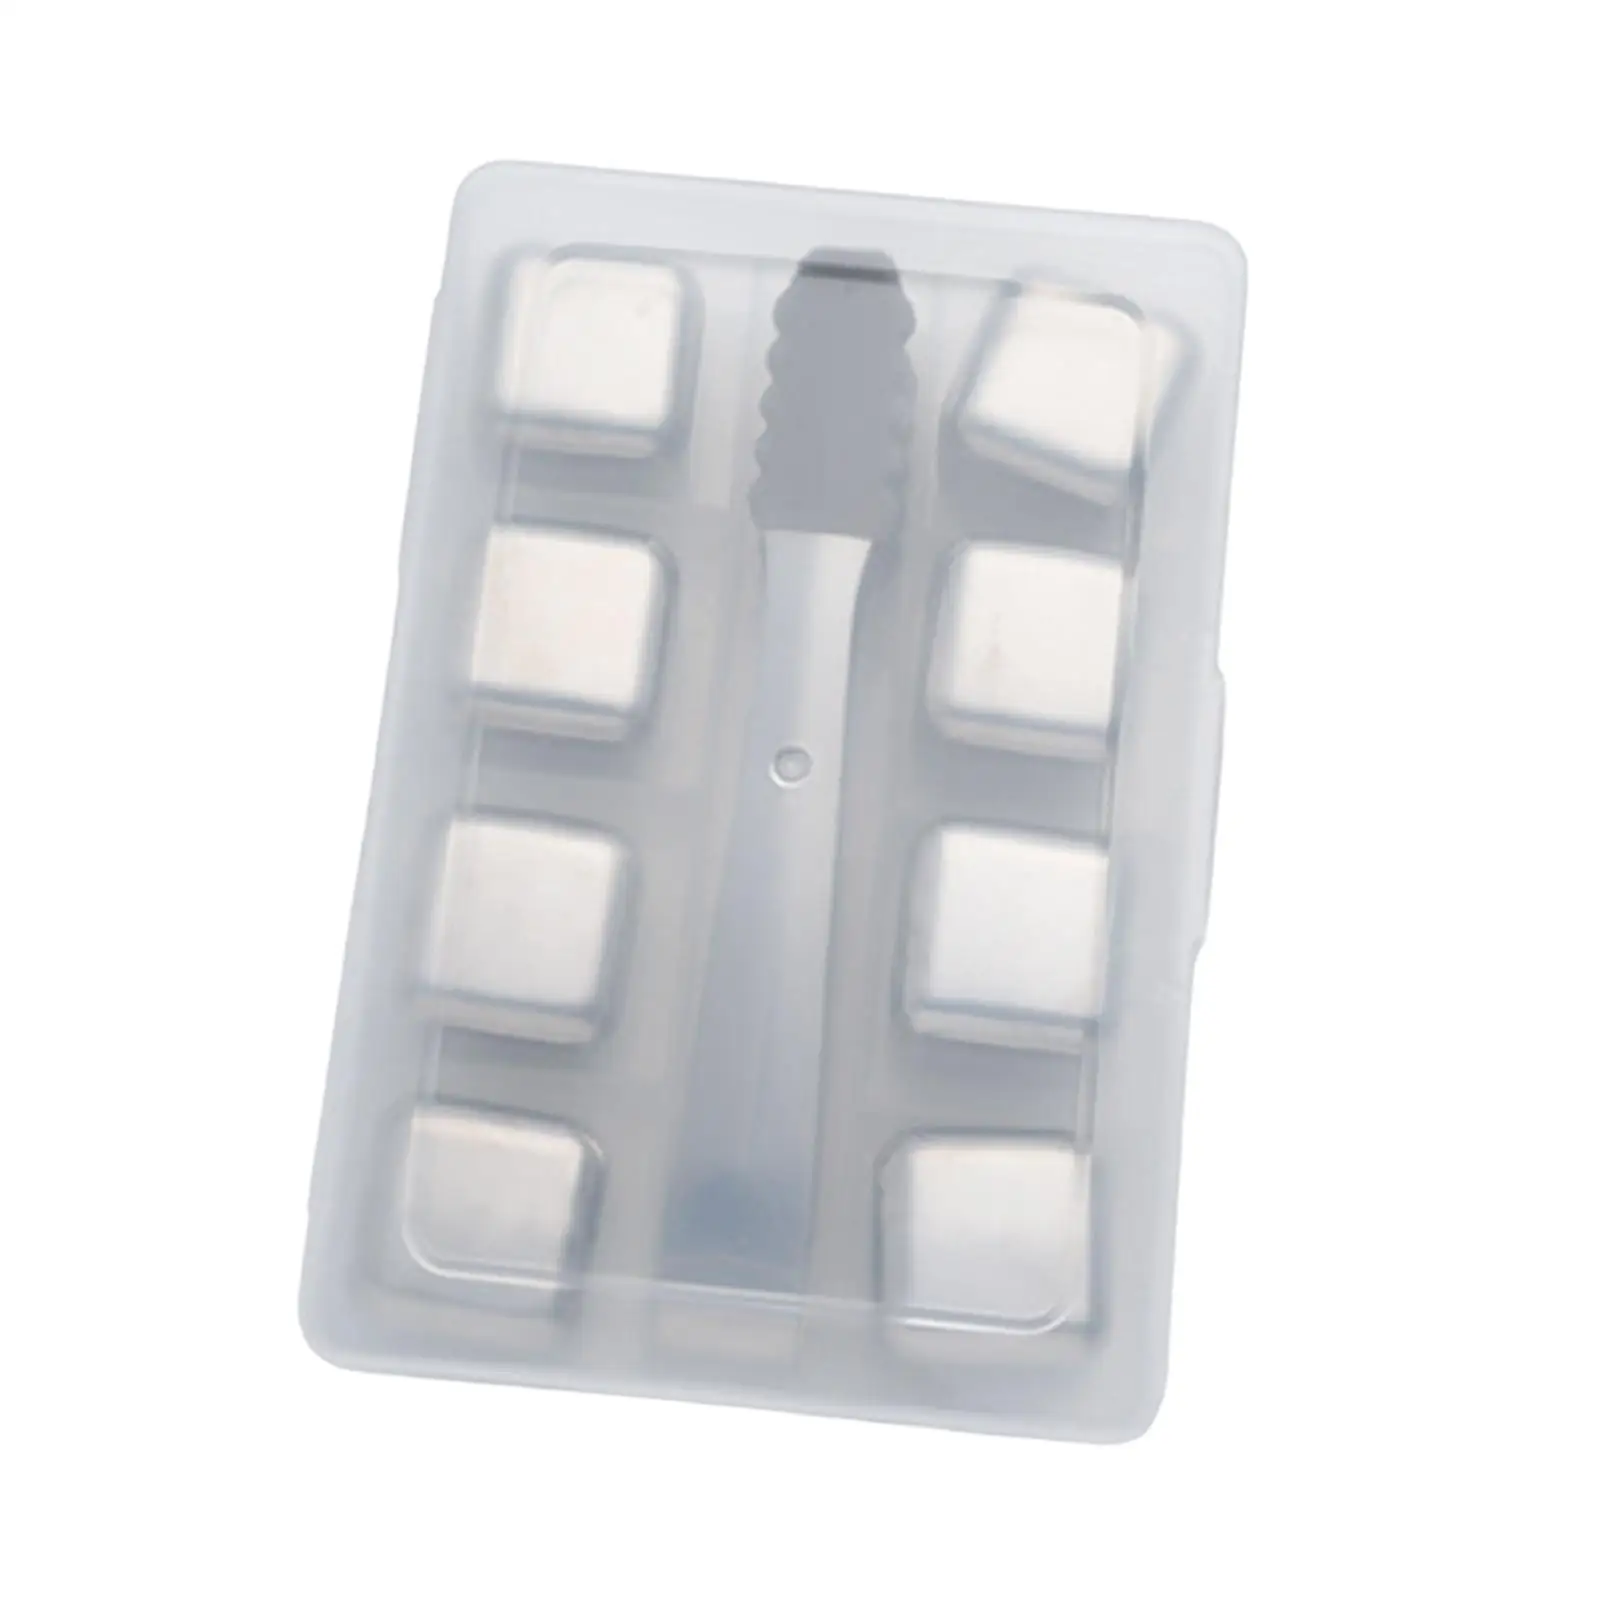 Stainless Steel Ice Cubes Reusable 2.5cm Cooling Cube Drinks Chilling Stones for Beverage Cocktail Party Home